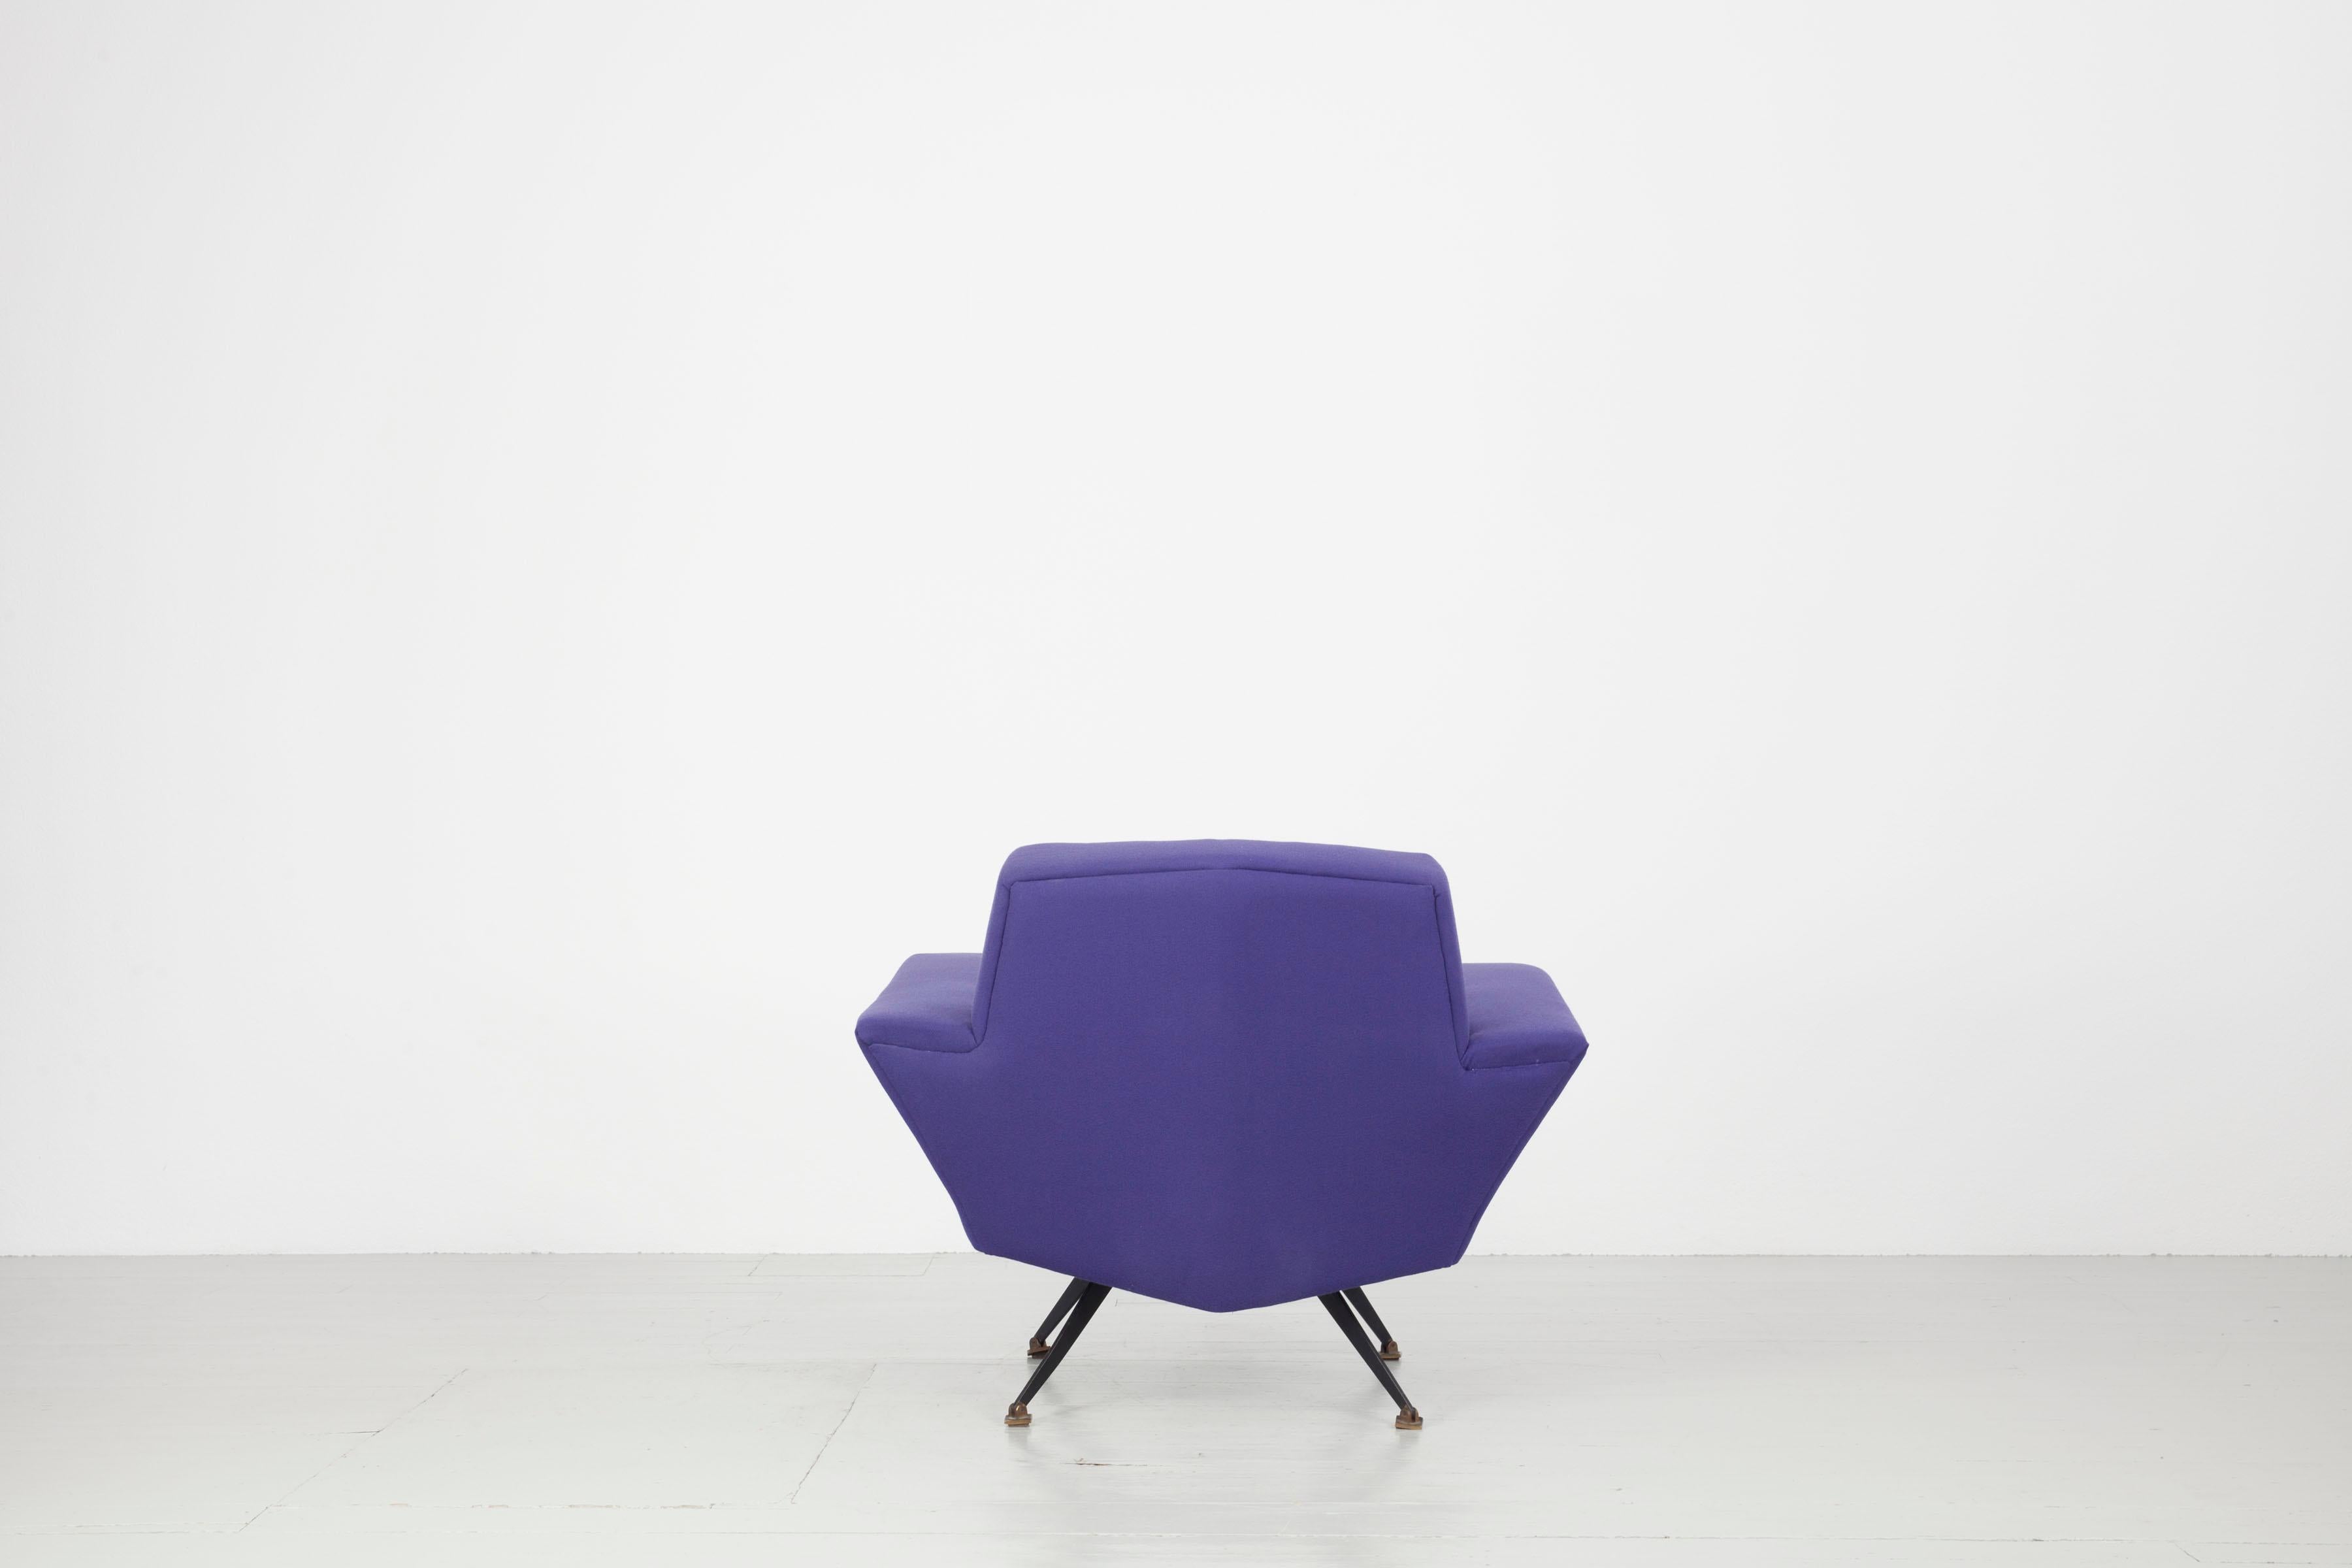 Pair of Italian Blue and Violet Armchairs by Lenzi, Studio Tecnico, Italy, 1950s For Sale 5